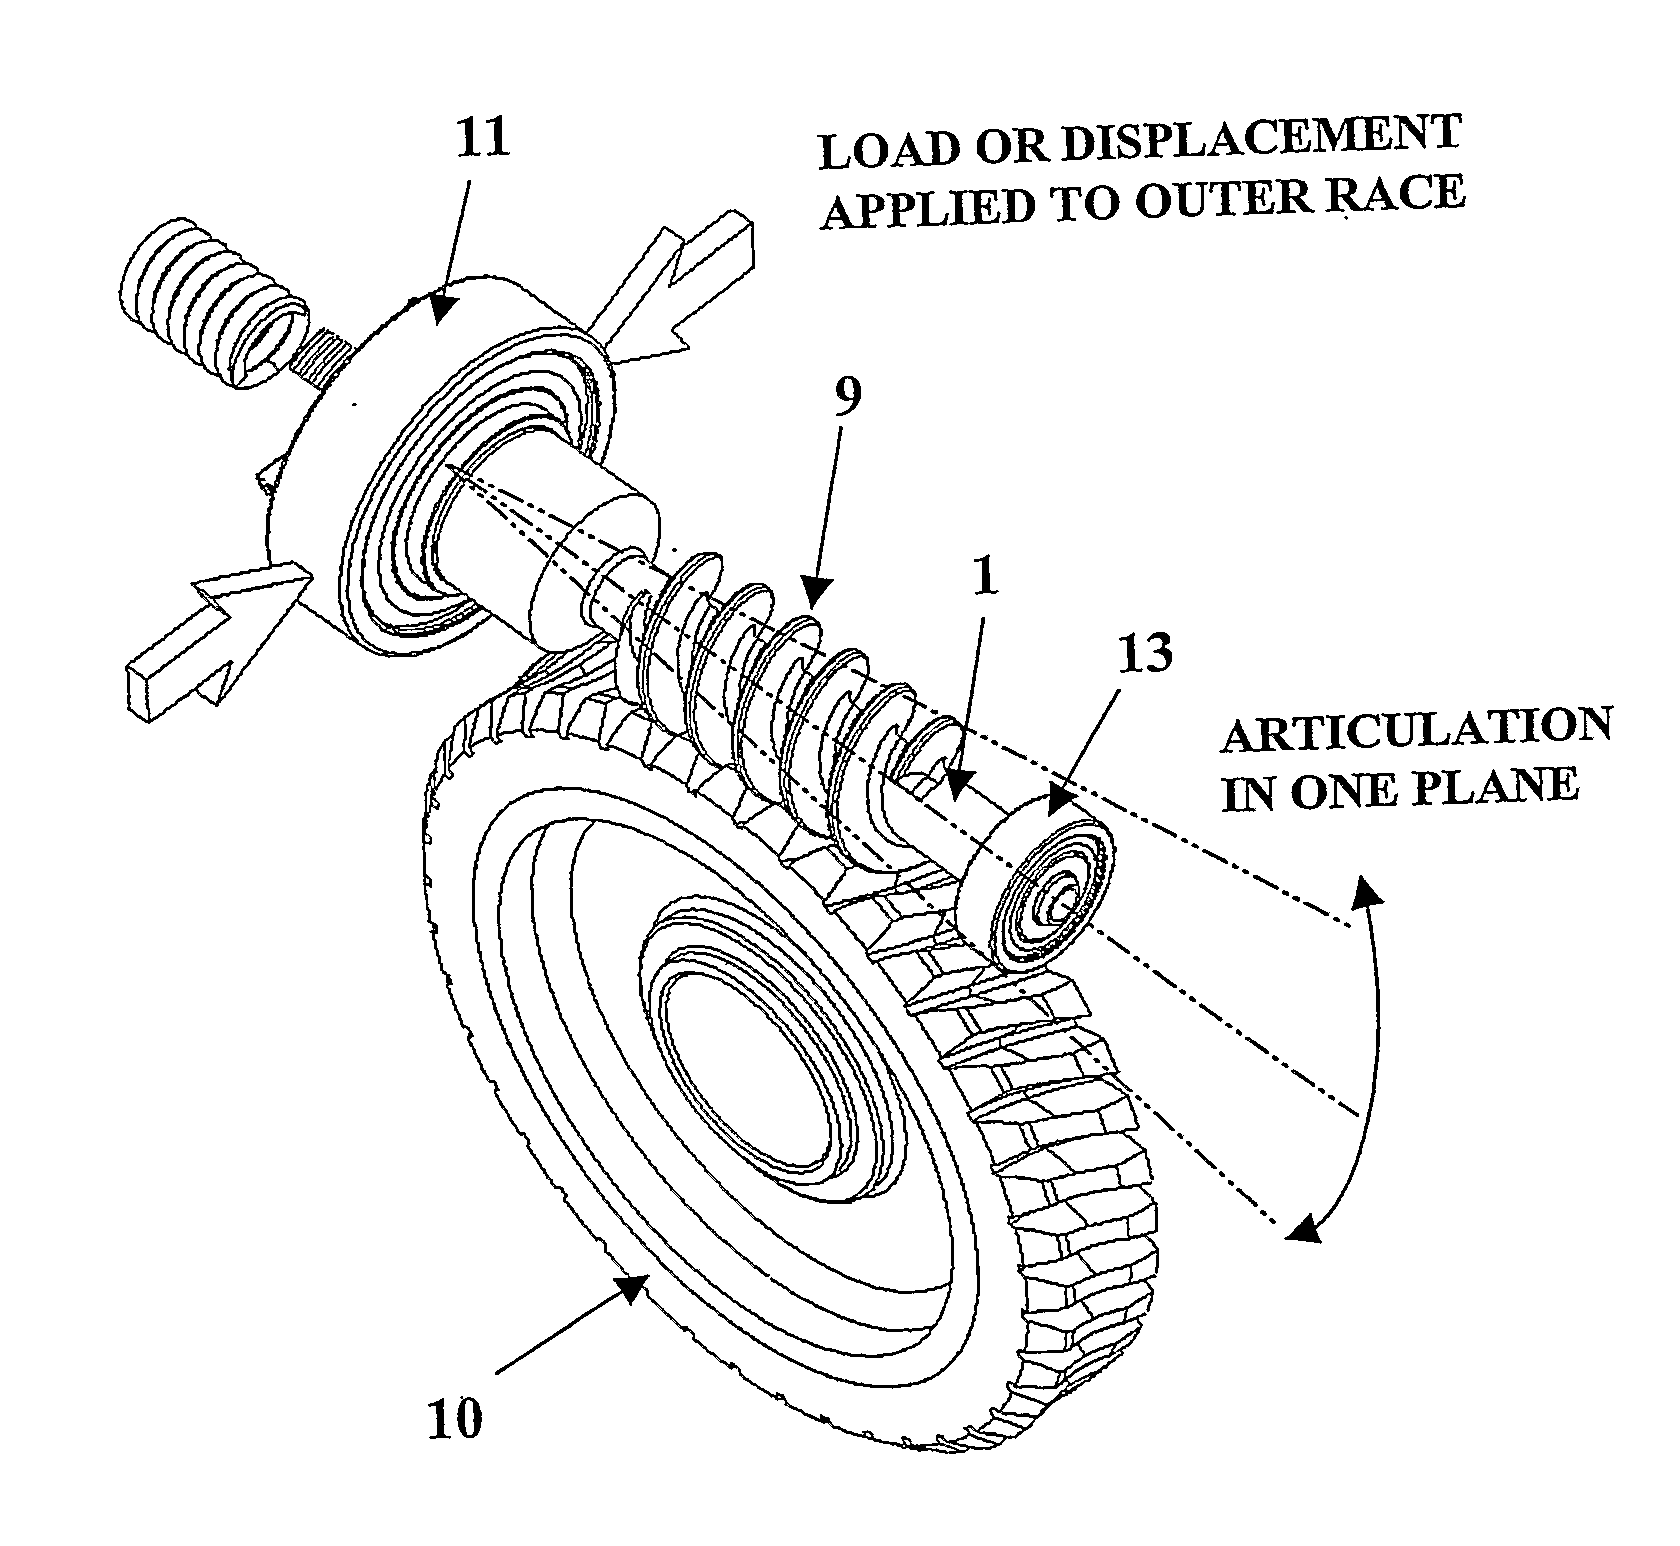 Worm gear for electric assisted steering apparatus and method controlling the movement of the worm shaft in a worm gearing